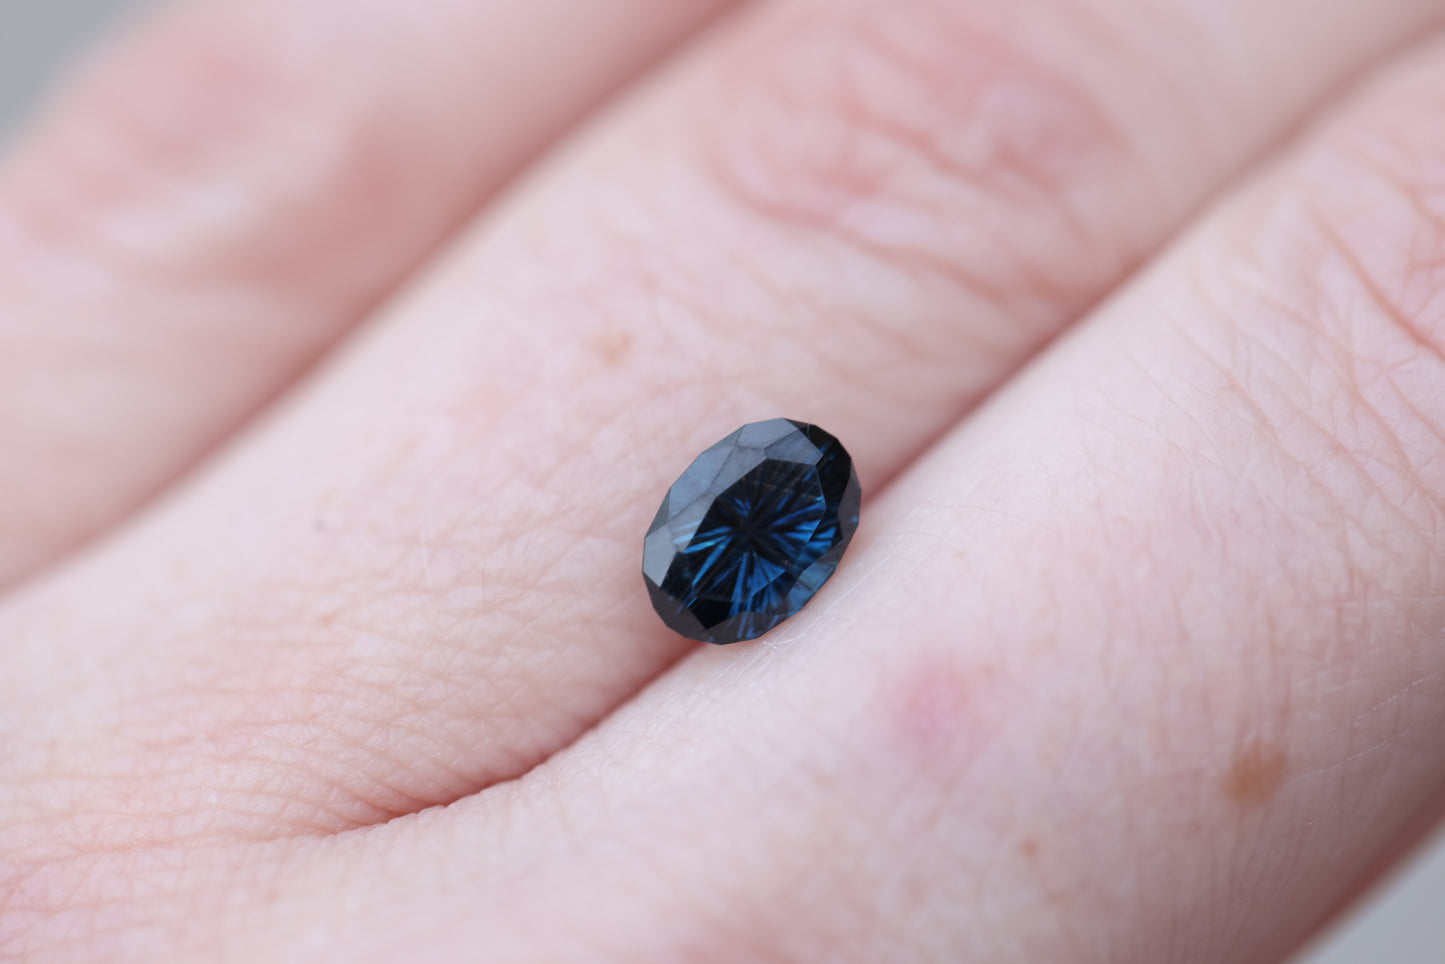 Load image into Gallery viewer, 1.69ct oval deep blue sapphire - Starbrite cut by John Dyer
